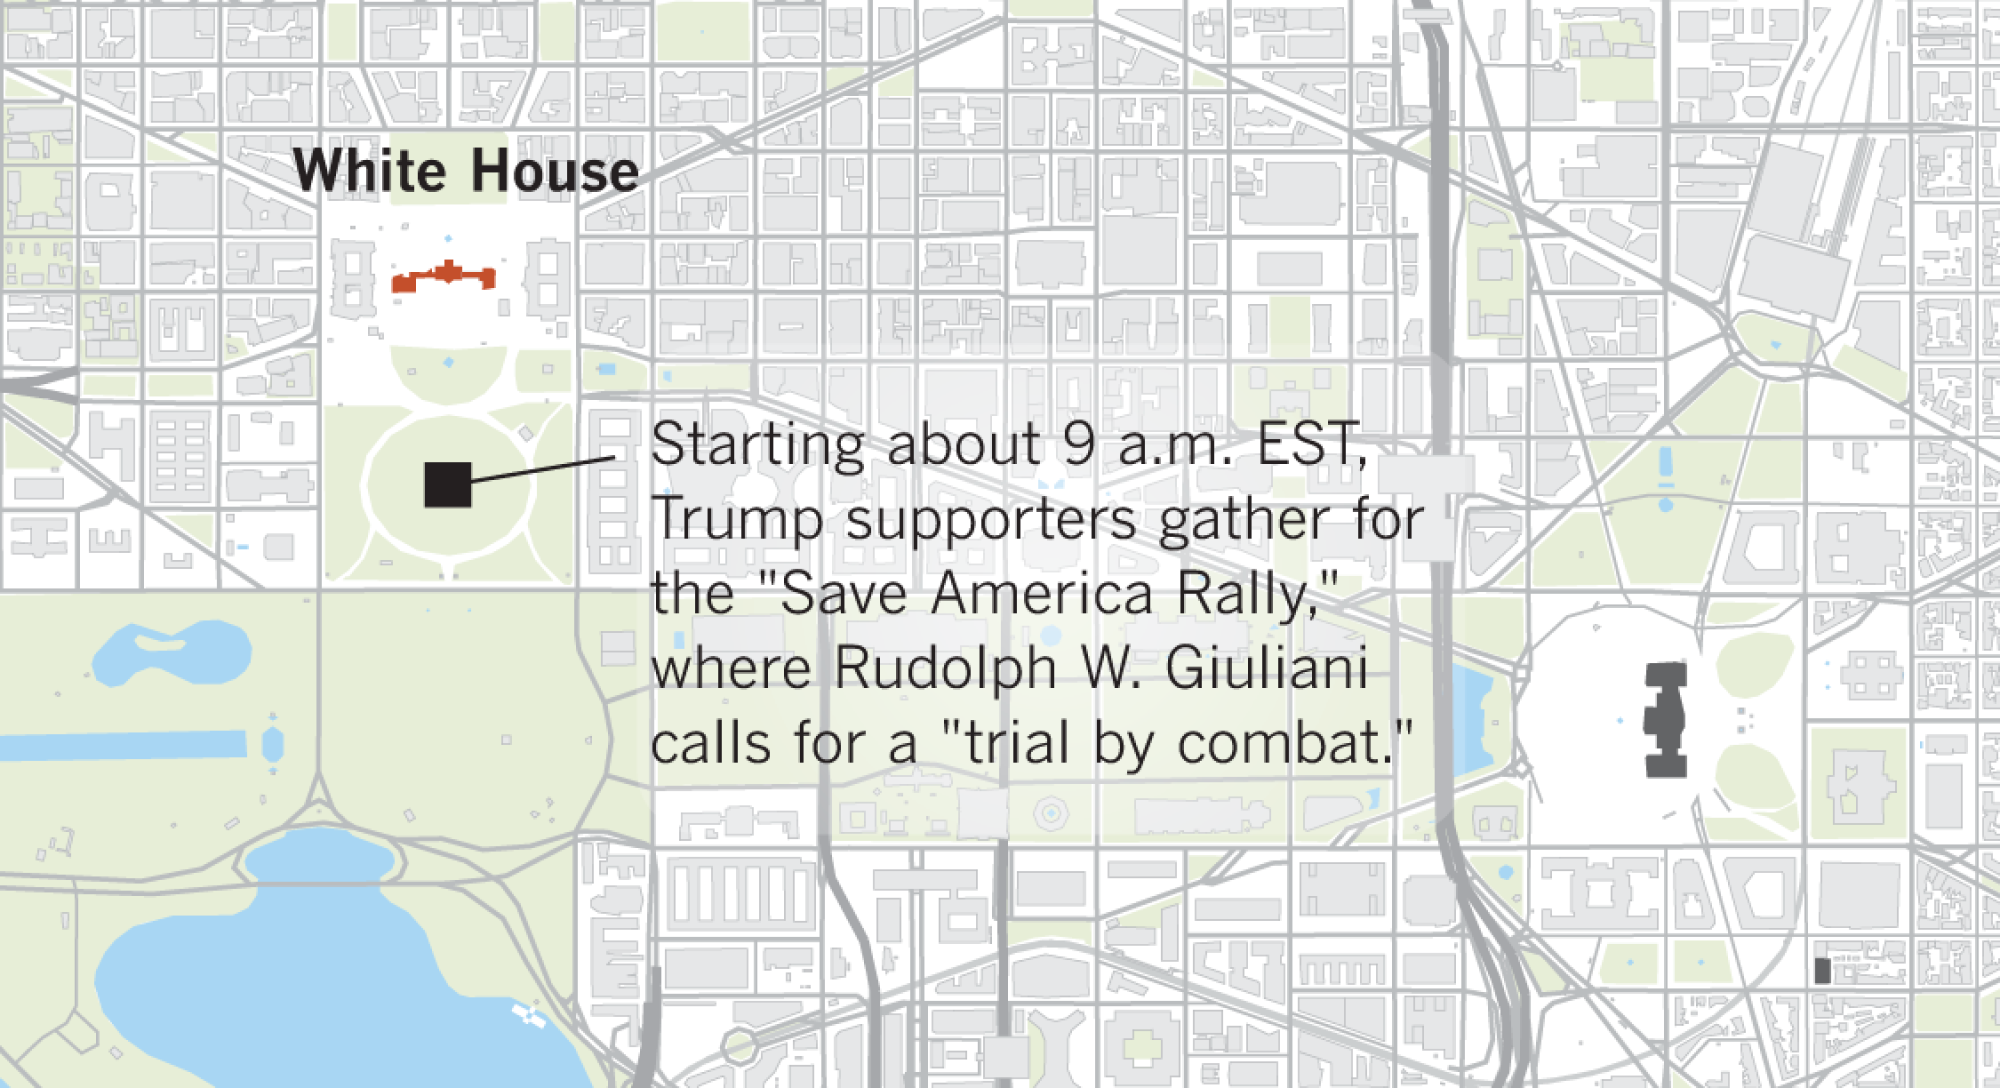 Map shows the White House where Trump leads the "Save America Rally"